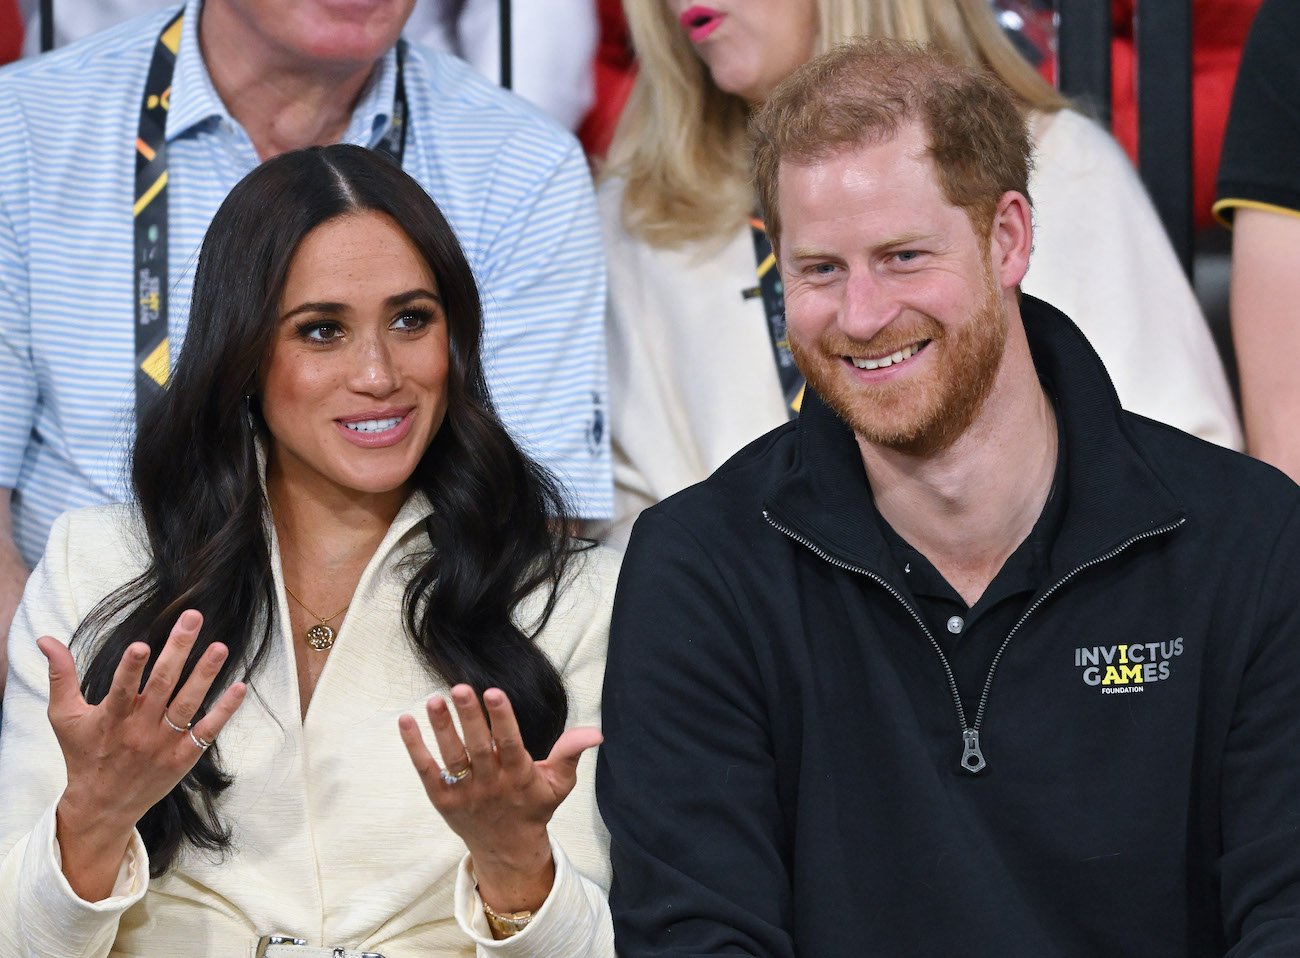 Meghan Markle wearing a white outfit and talking to Prince Harry, who is wearing a black outfit